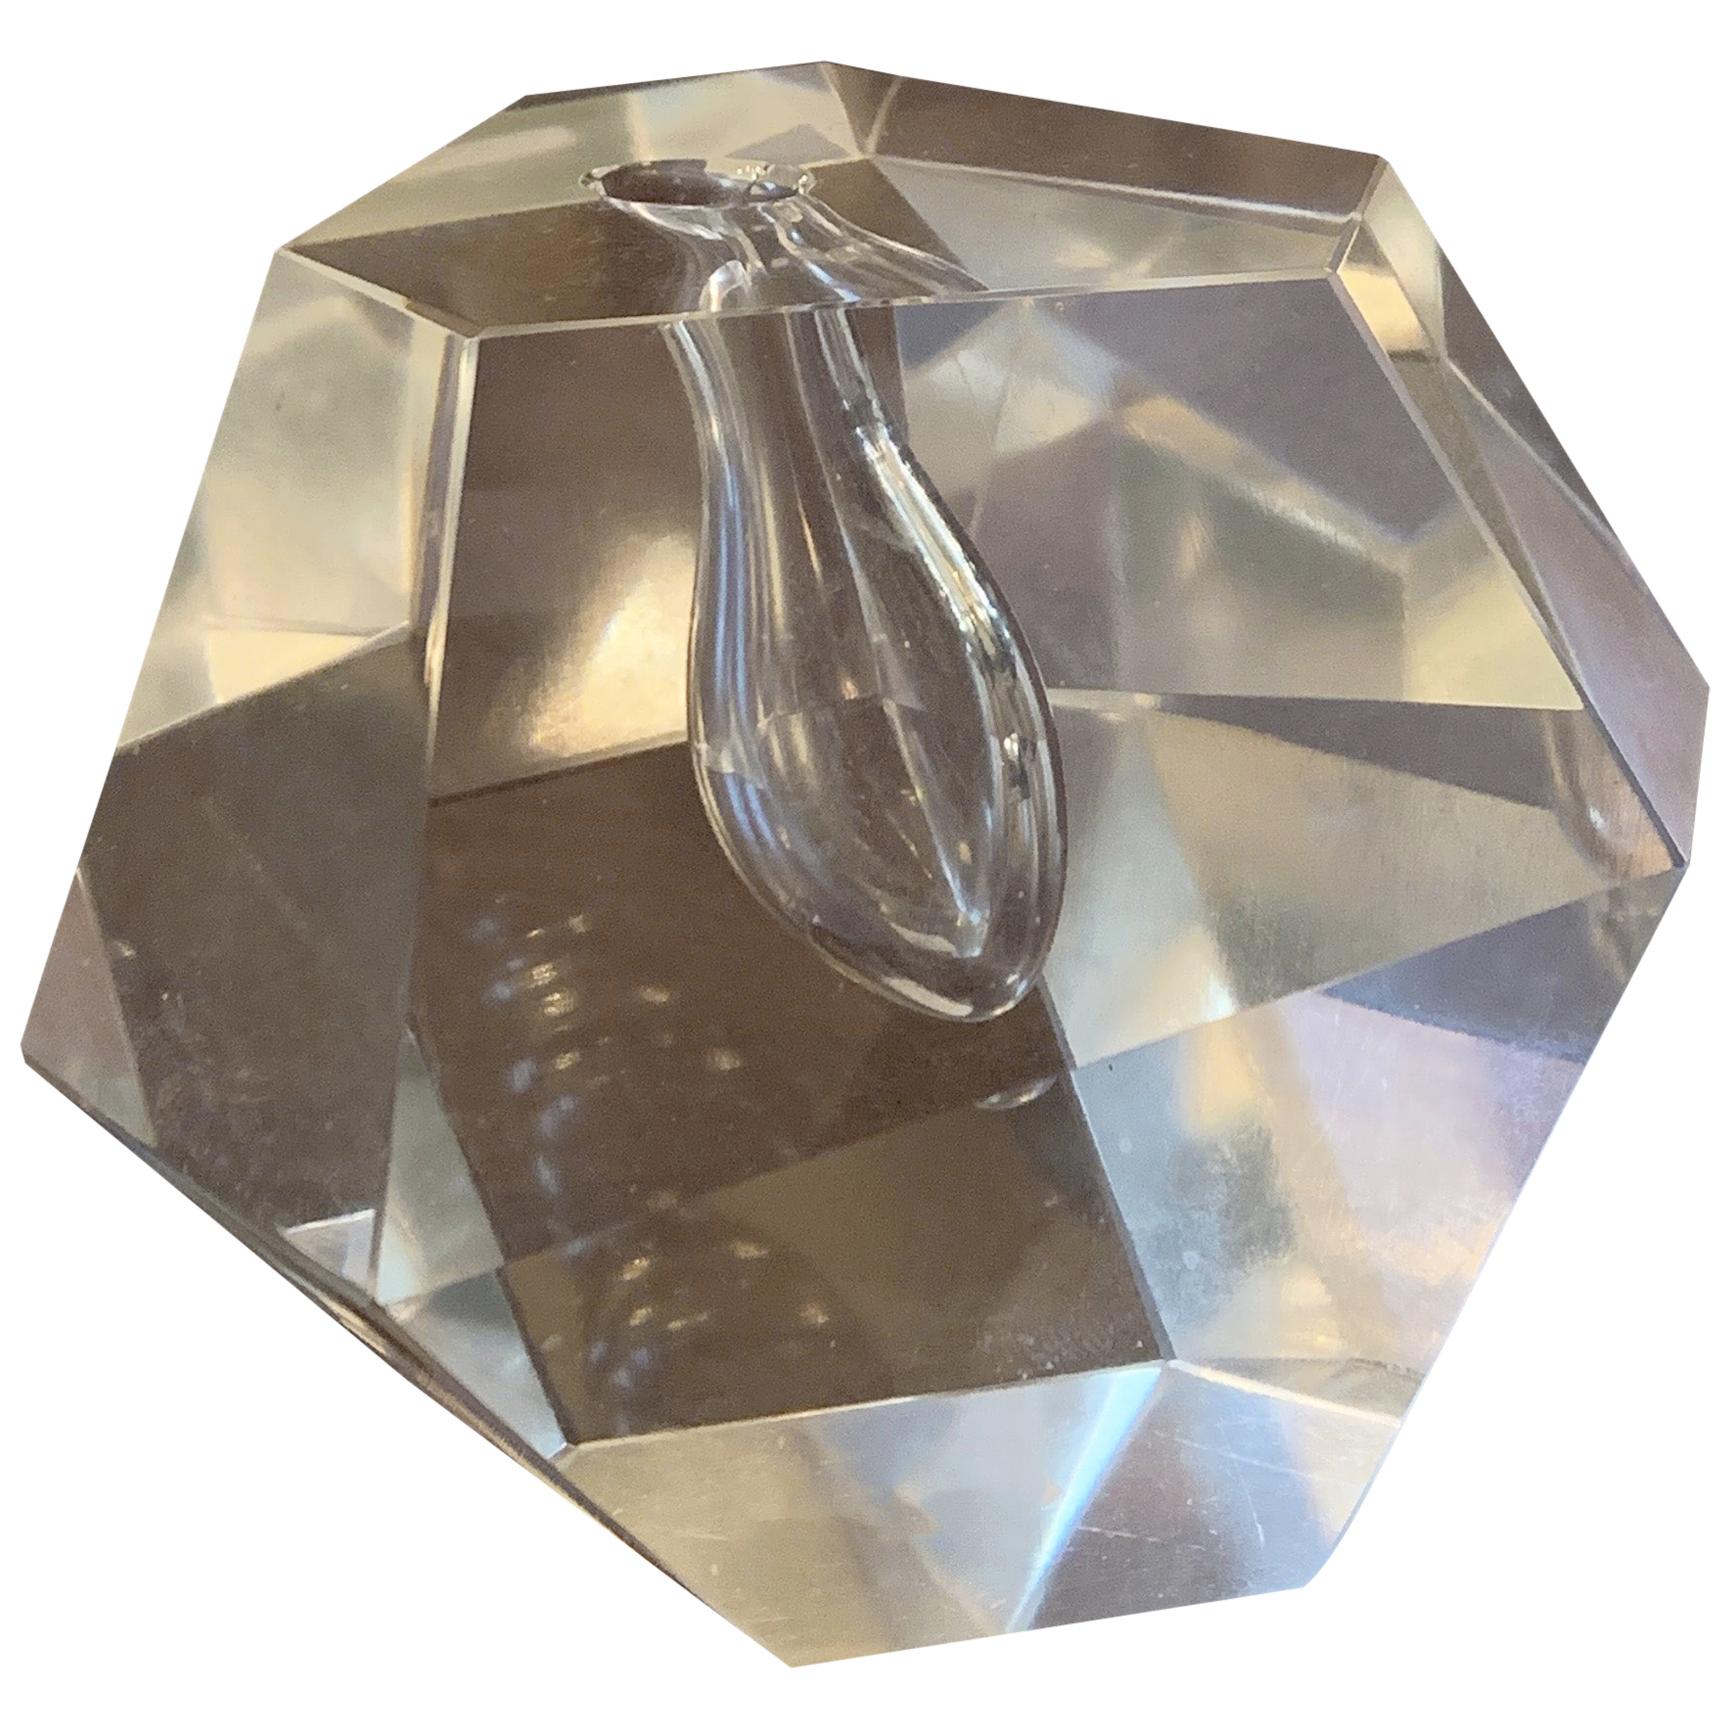 Faceted Crystal "Orchid" Bud Vase by Timo Sarpaneva for littala, Finland